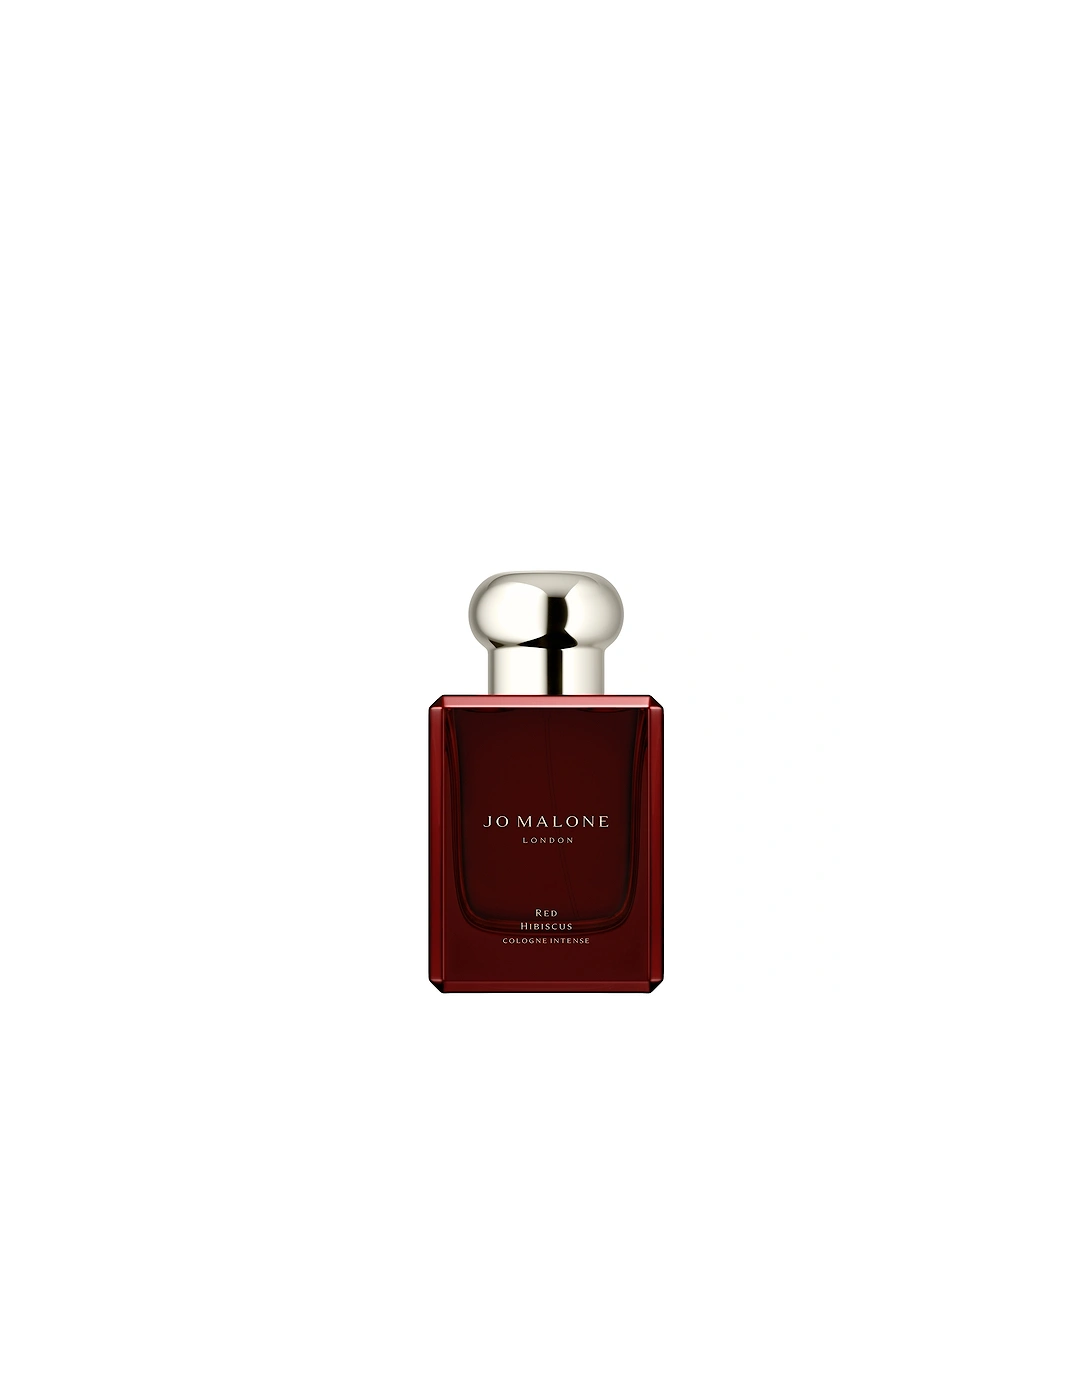 London Red Hibiscus Cologne Intense 50ml, 2 of 1